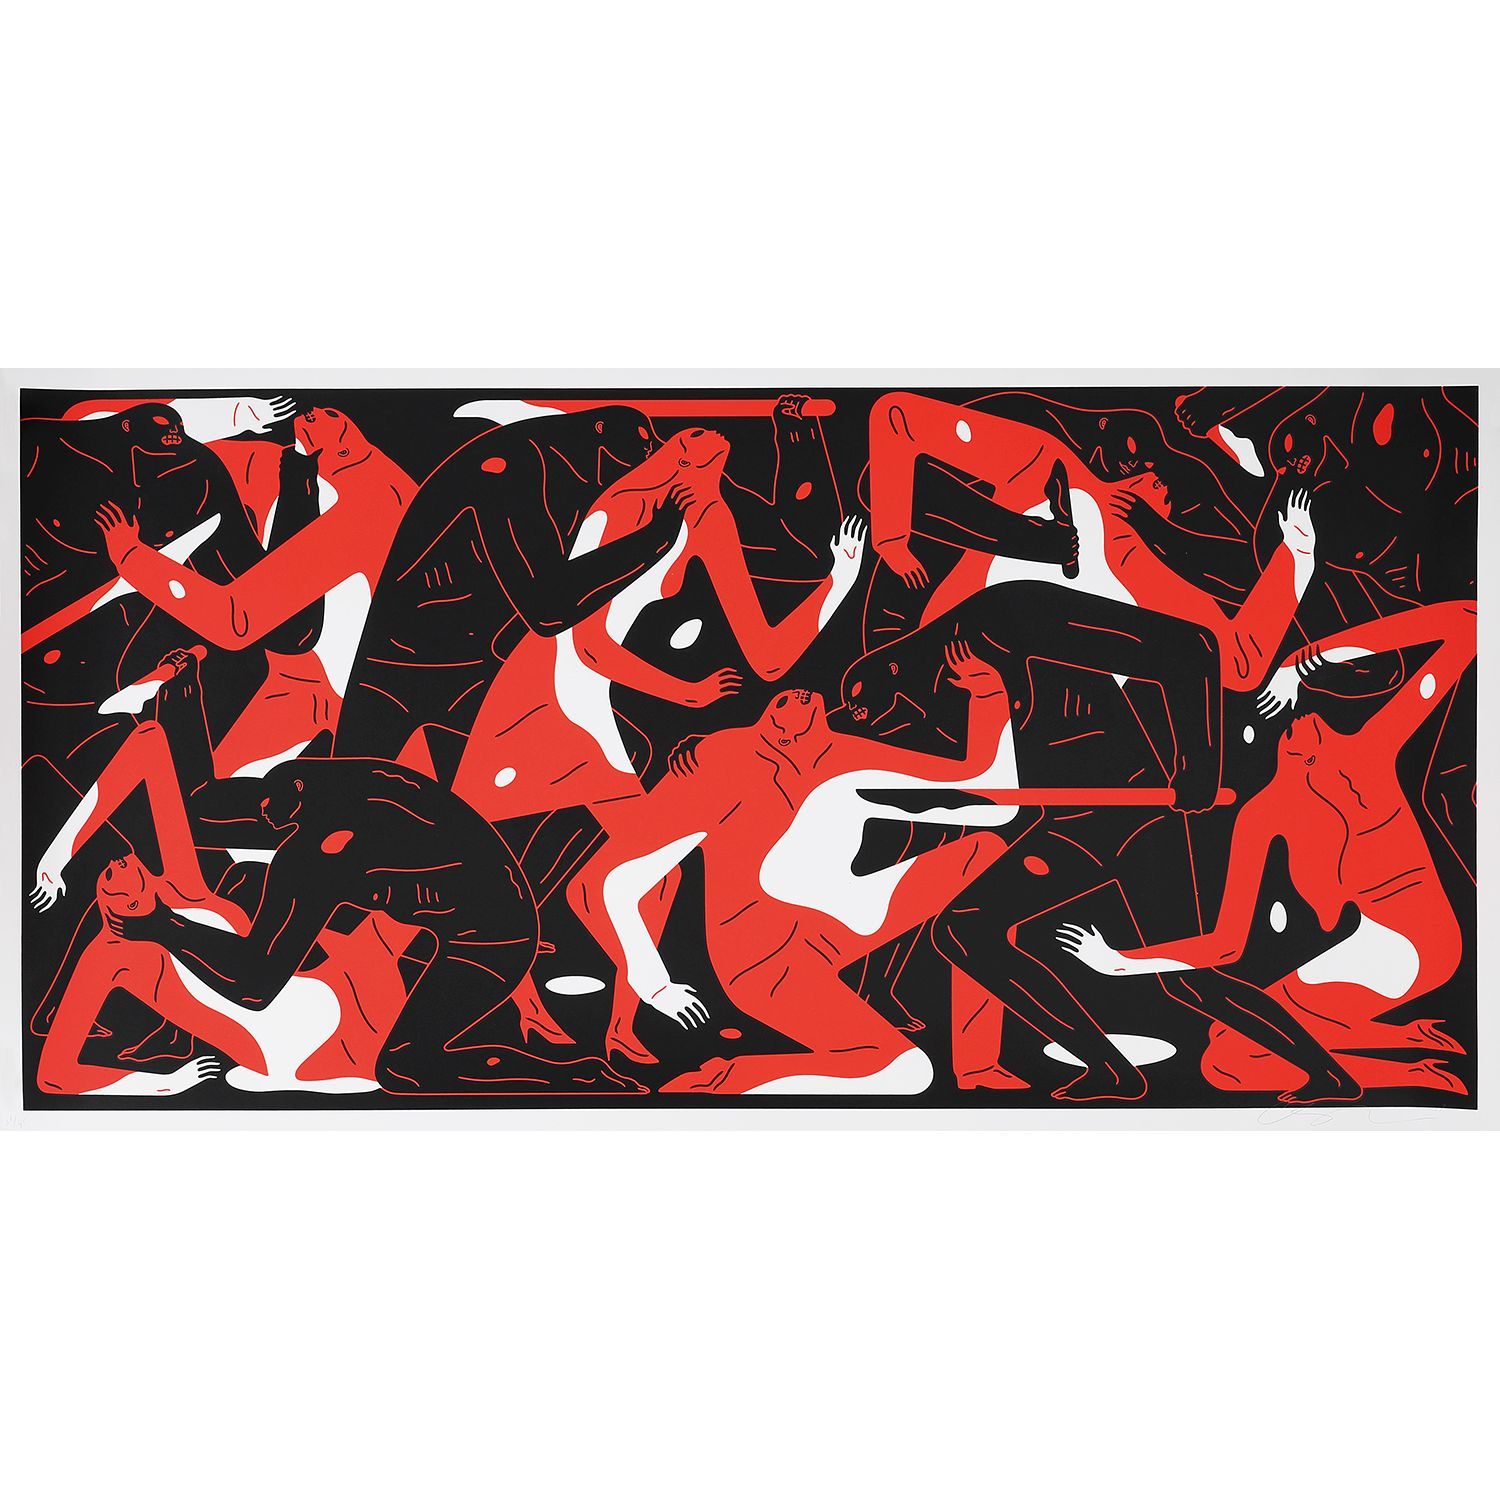 Null CLEON PETERSON (born 1973)

POISON IN THE MIND (RED), 2019

Silkscreen on p&hellip;